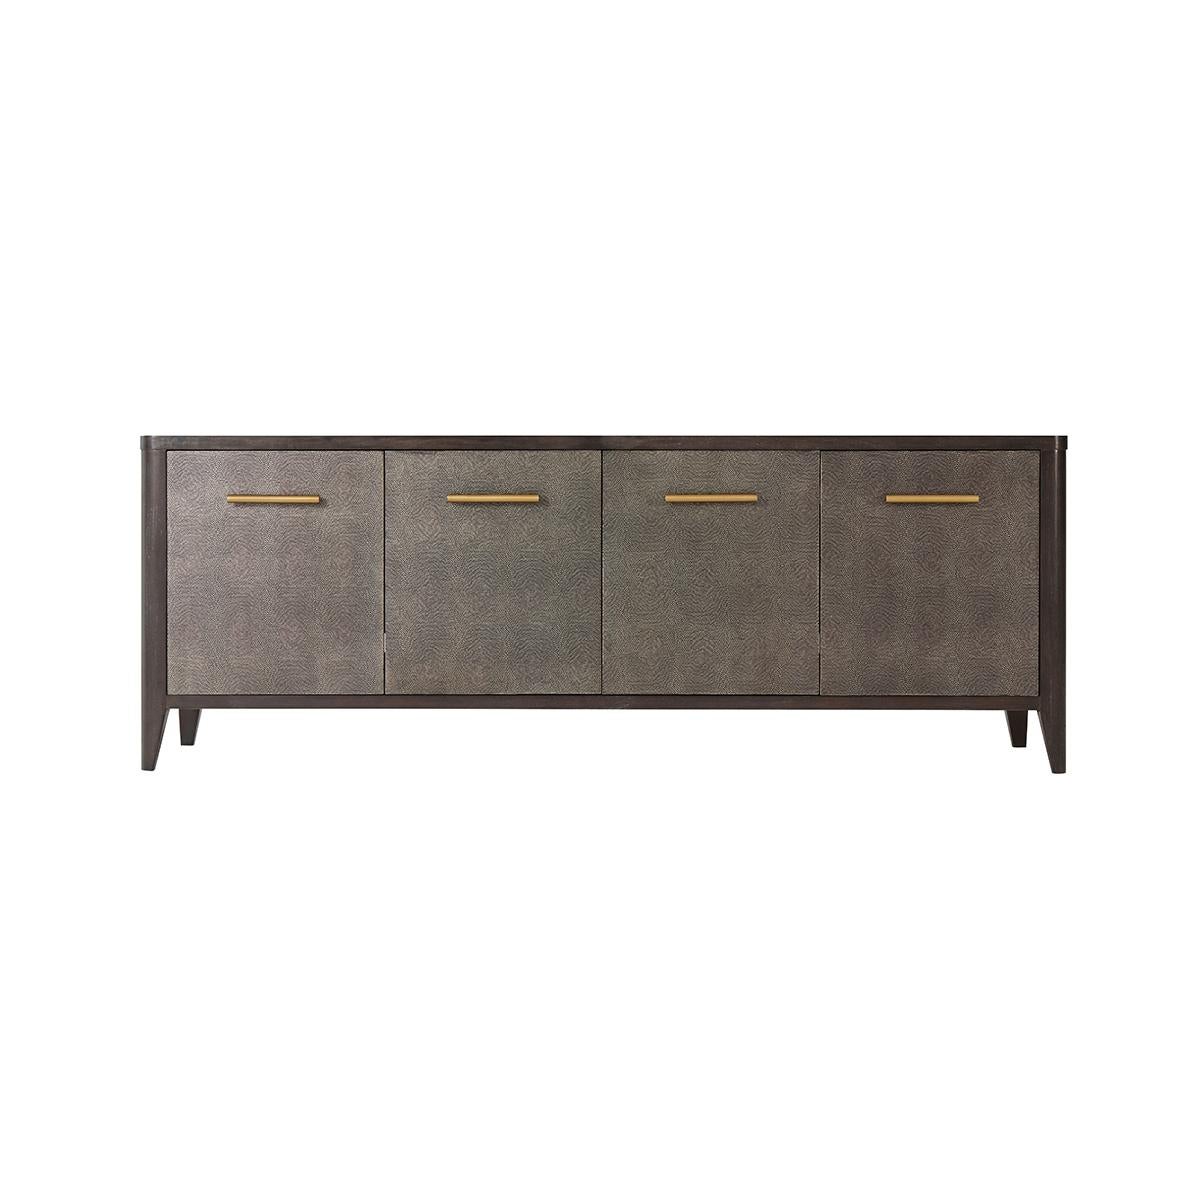 Modern leather wrapped media cabinet, in our Rowan finish. The tempest finish embossed leather doors and sides, with four doors enclosing shelves with brushed brass finish handles raised on flared tapered legs.

Dimensions: 66.5